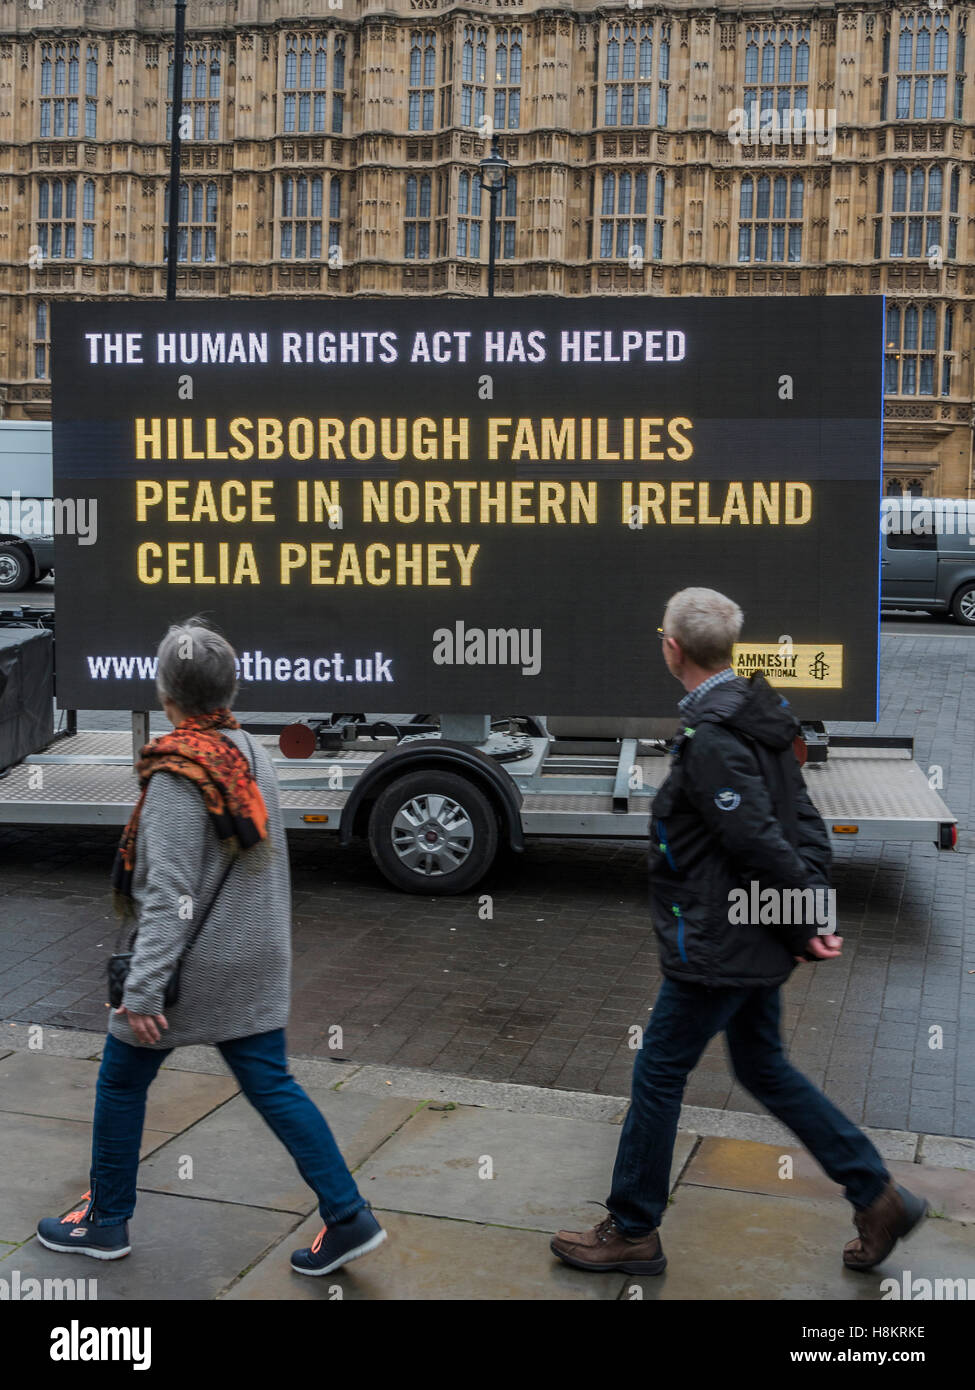 Westminster, London, UK. 15th November, 2016. Amnesty International launch extensive ad campaign highlighting importance of Human Rights Act for Hillsborough. Relatives of some of the victims of the Hillsborough disaster today issued a call on Theresa May to keep the Human Rights Act. The call comes as Amnesty International published a new YouGov poll which found that most people (70%) in the UK who expressed an opinion were unaware of the role the Human Rights Act played in the historic inquest. Credit:  Guy Bell/Alamy Live News Stock Photo